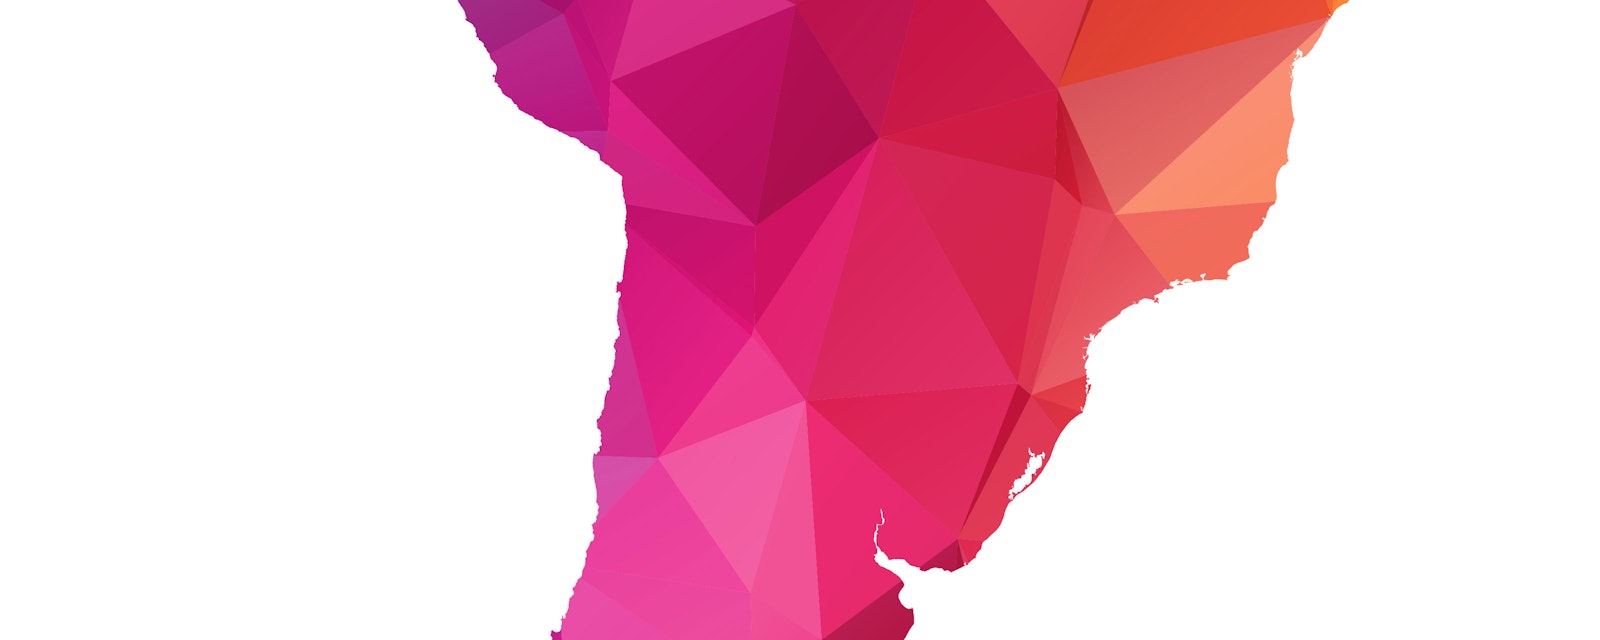 Abstract Polygon Map of Latin America